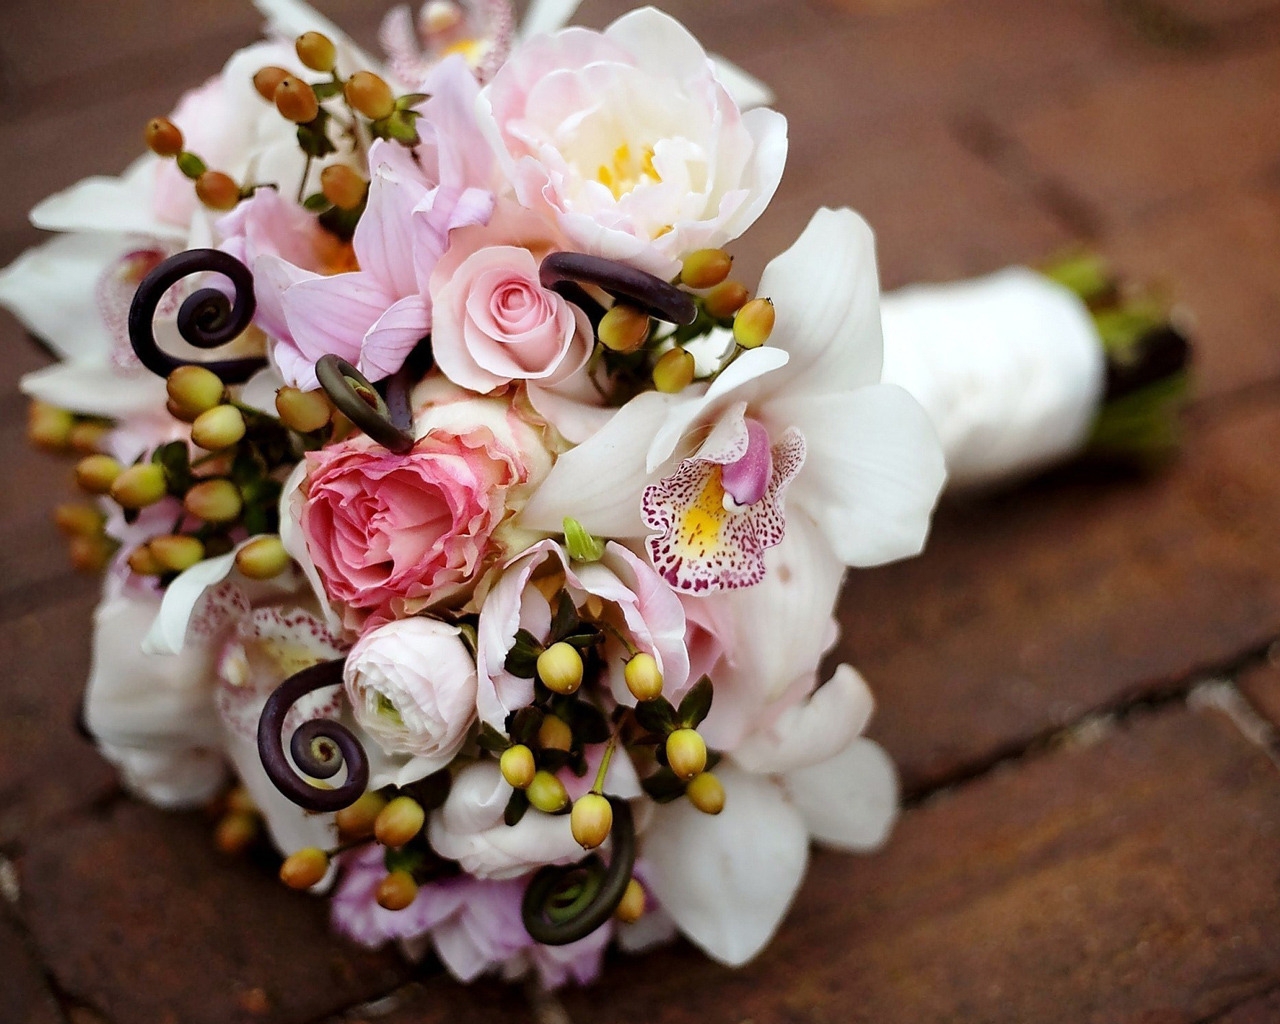 Wedding Flowers Bouquet for 1280 x 1024 resolution